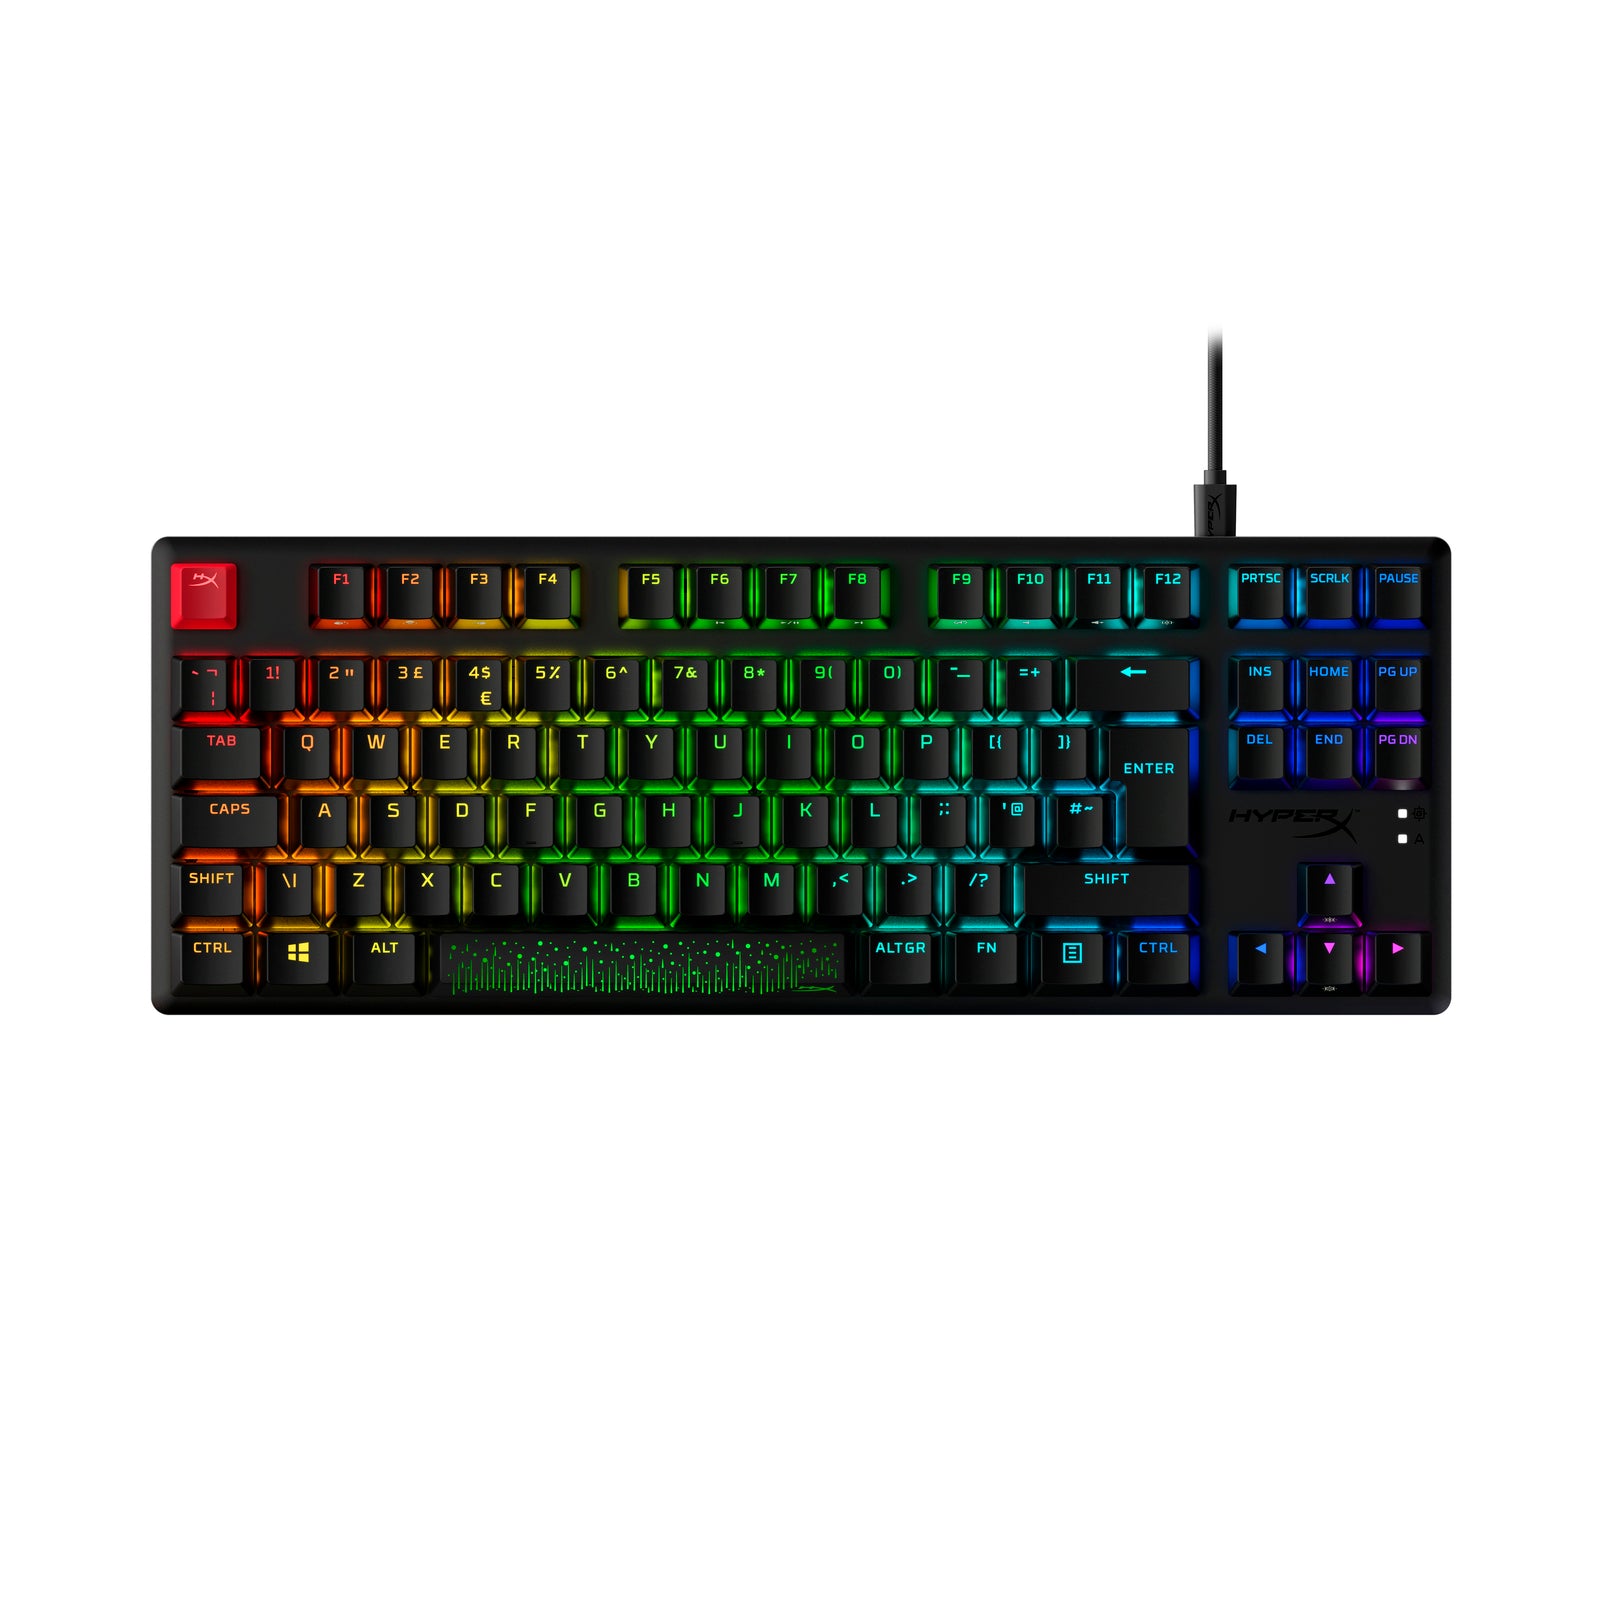 HyperX Alloy Origins Core PBT Gaming Keyboard Front View Showing RGB Effects